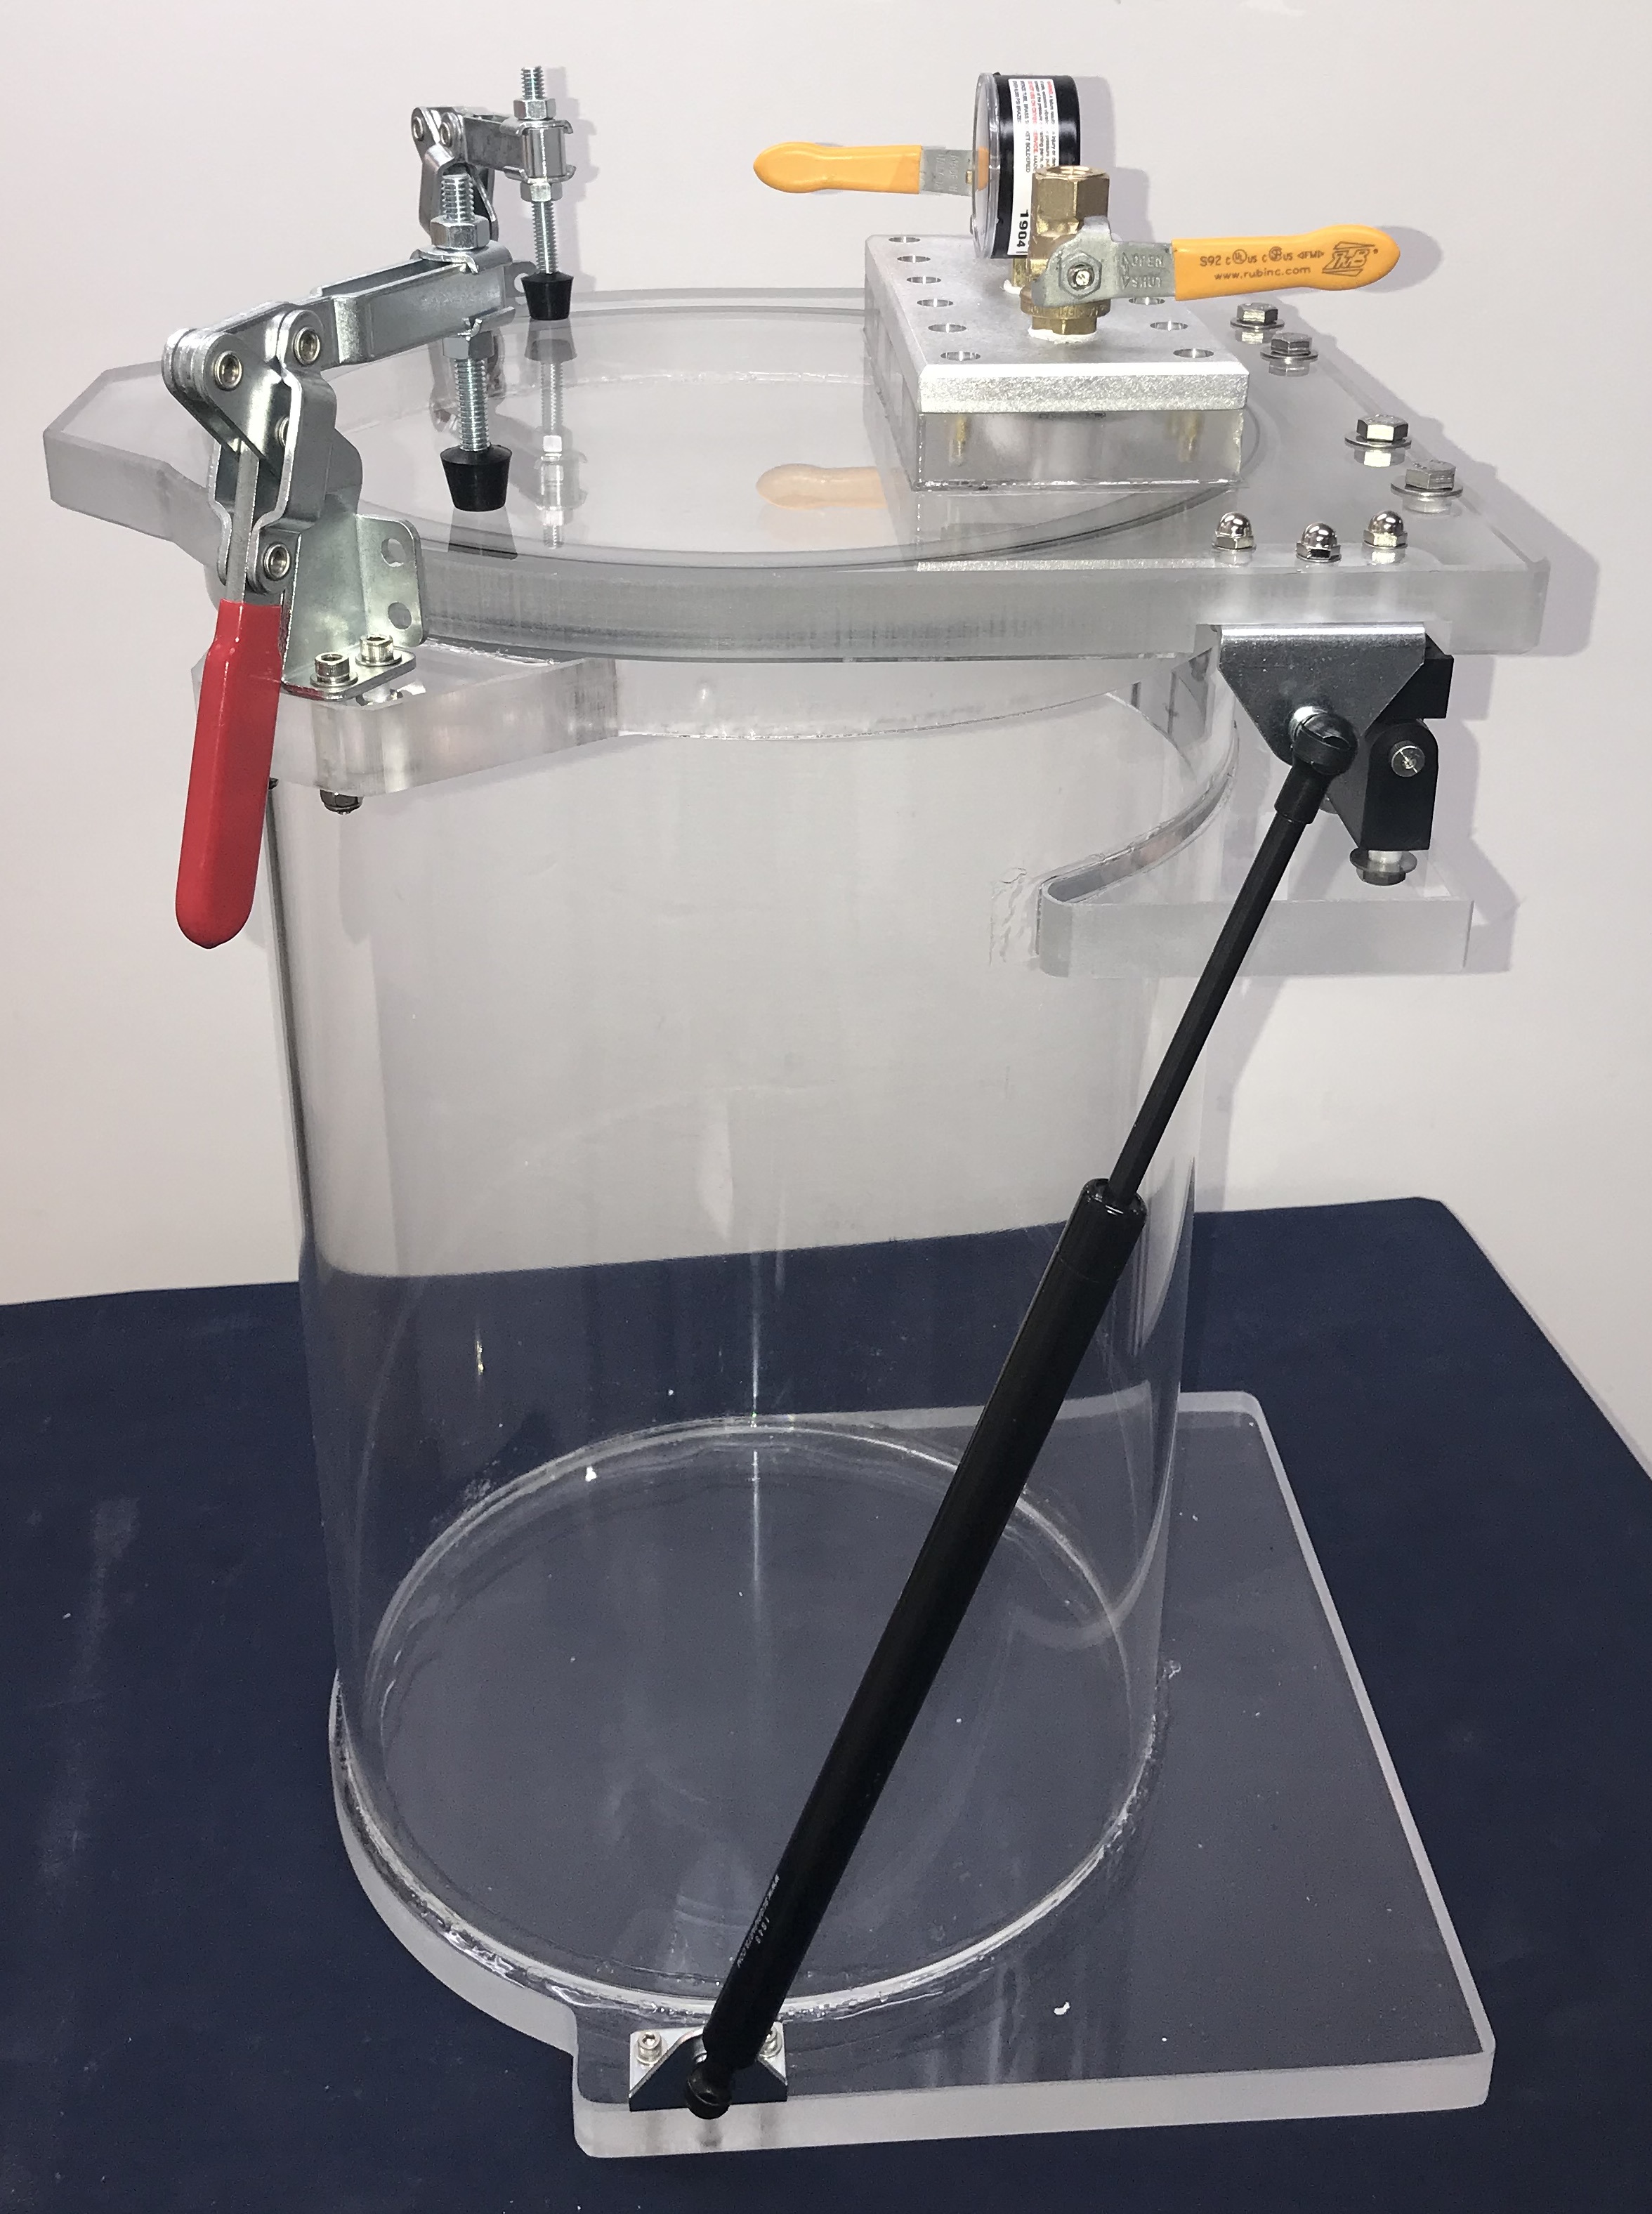 https://www.sanatron.com/products/images/cylindrical-vacuum-chamber-hinged-lid.jpg